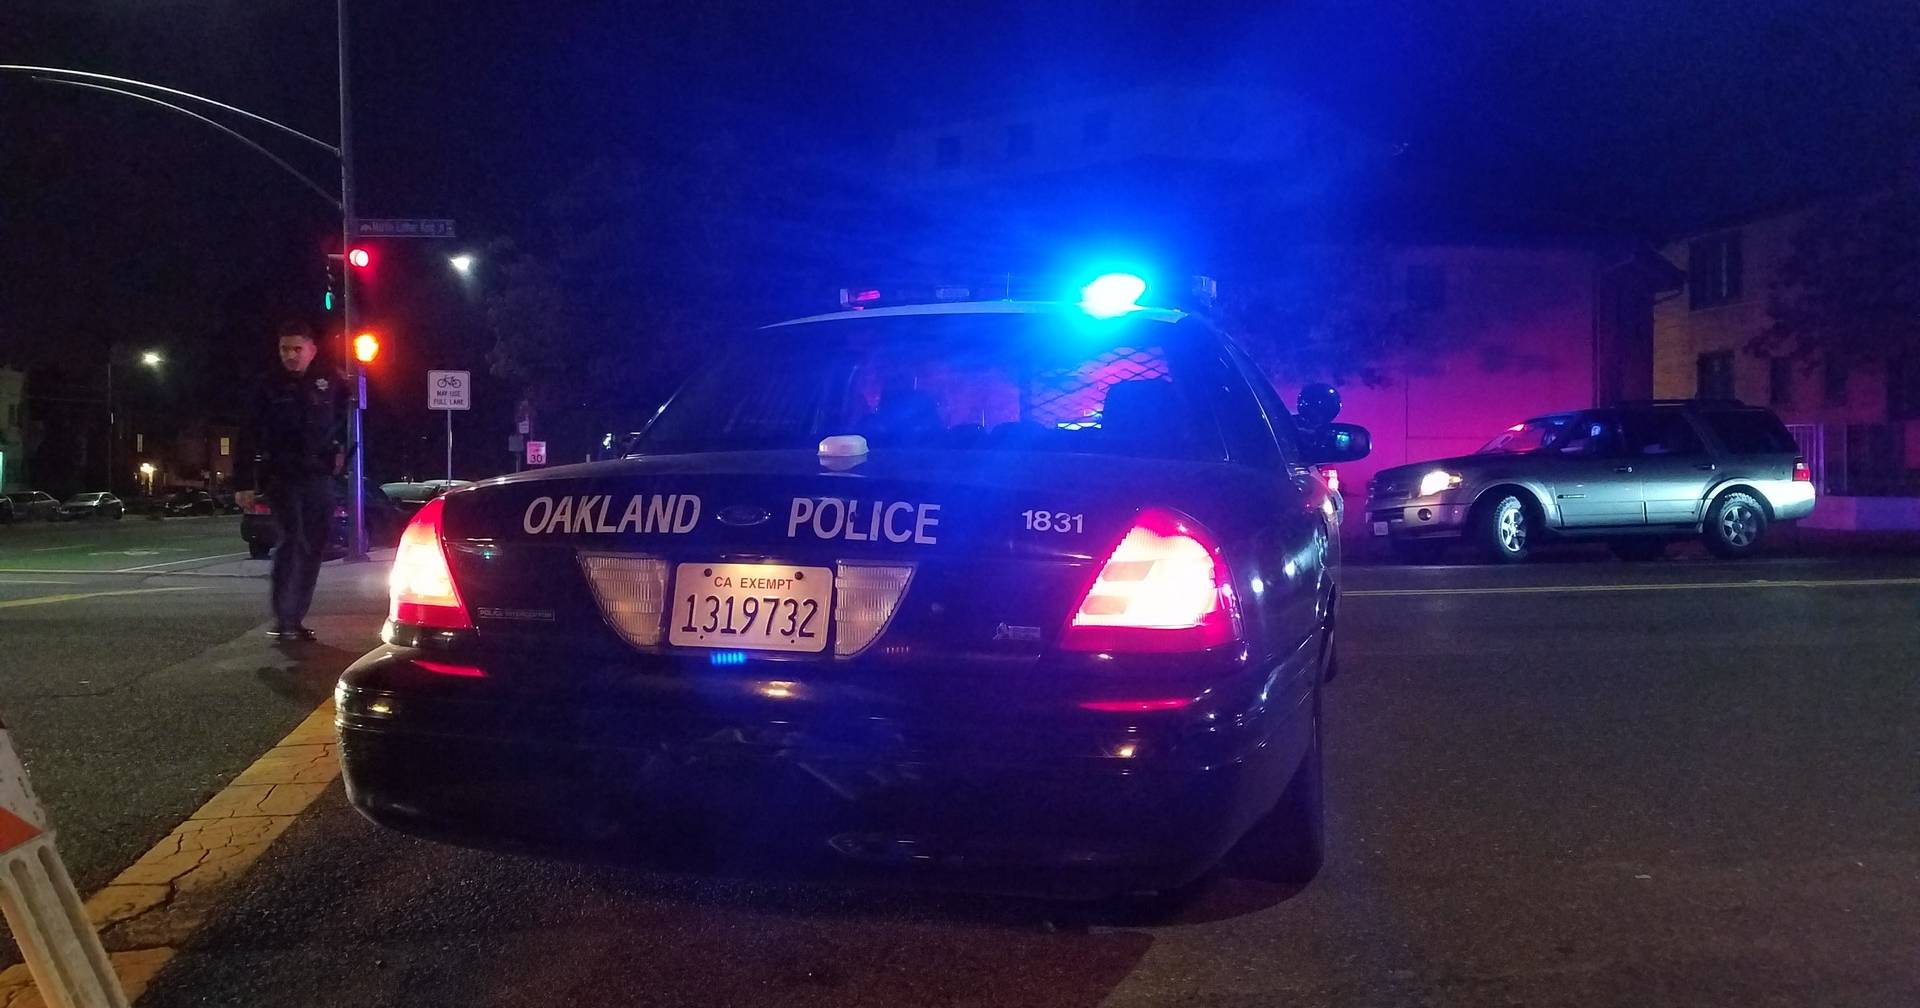 A federal judge heard arguments Monday on what a recent officer sexual exploitation case says about the Oakland Police Department's 14-year reform effort. Alex Emslie/KQED